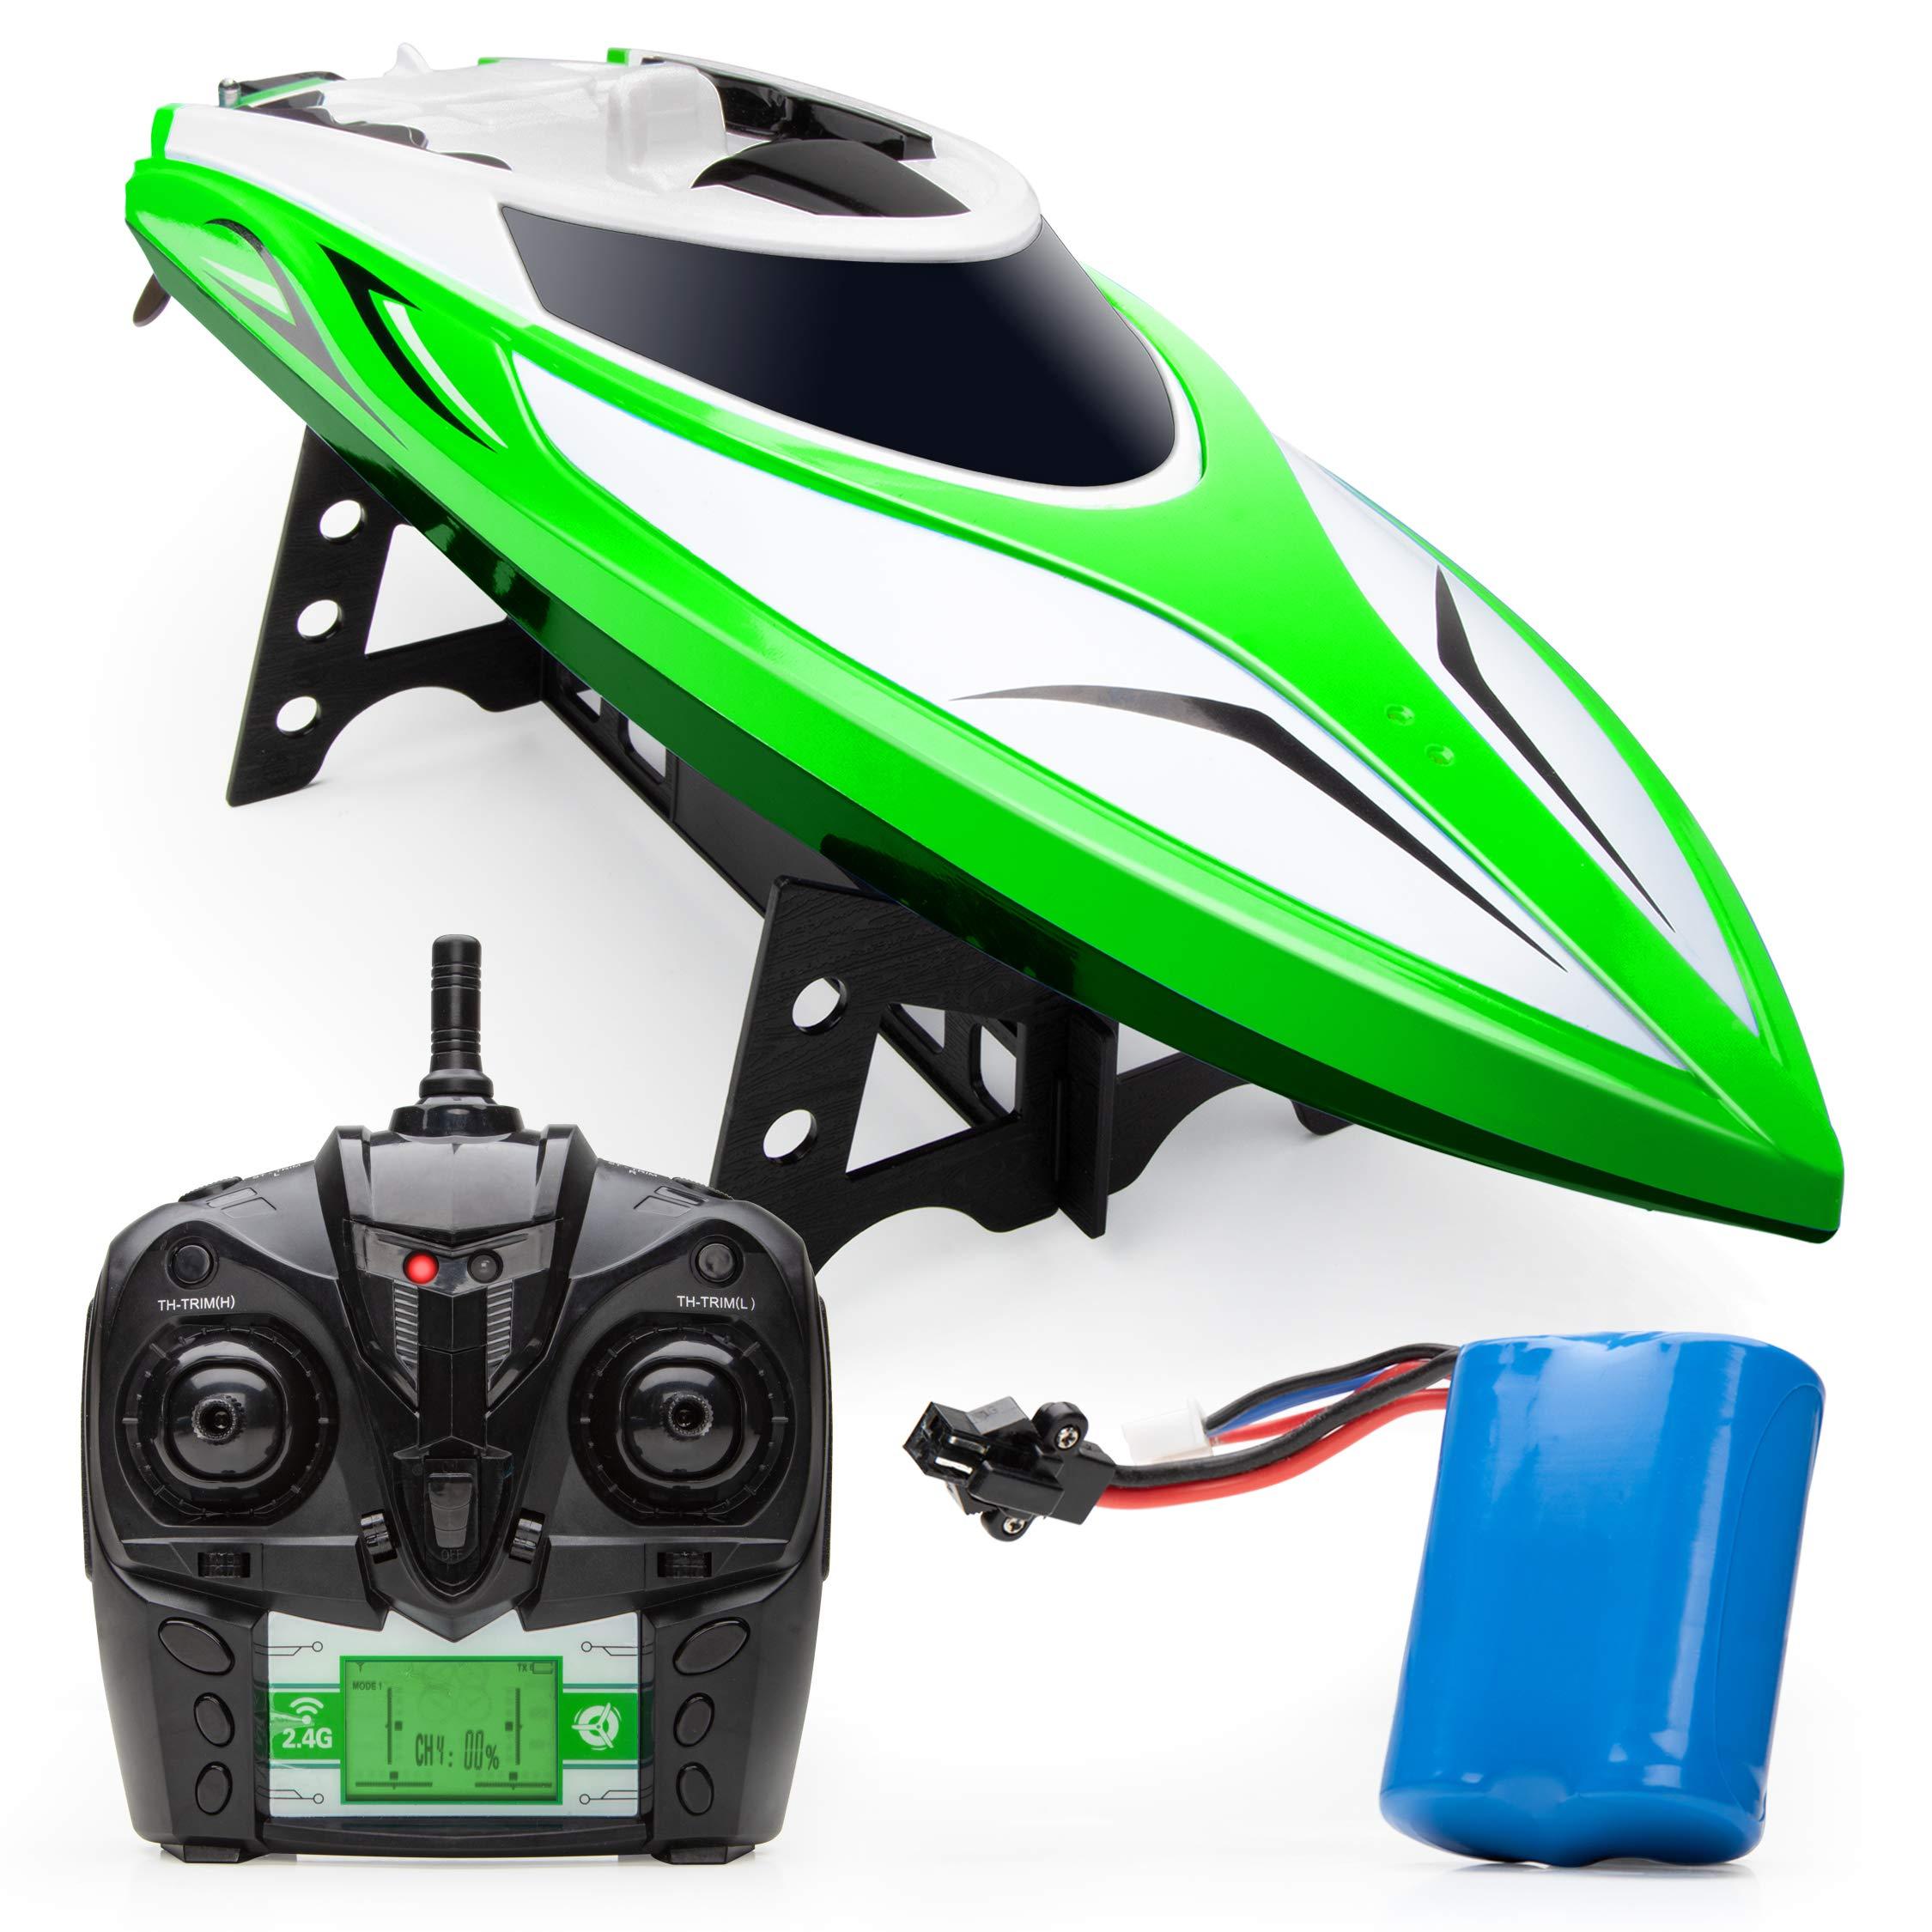 H102 Rc Boat: <br>High-Performance RC Boat